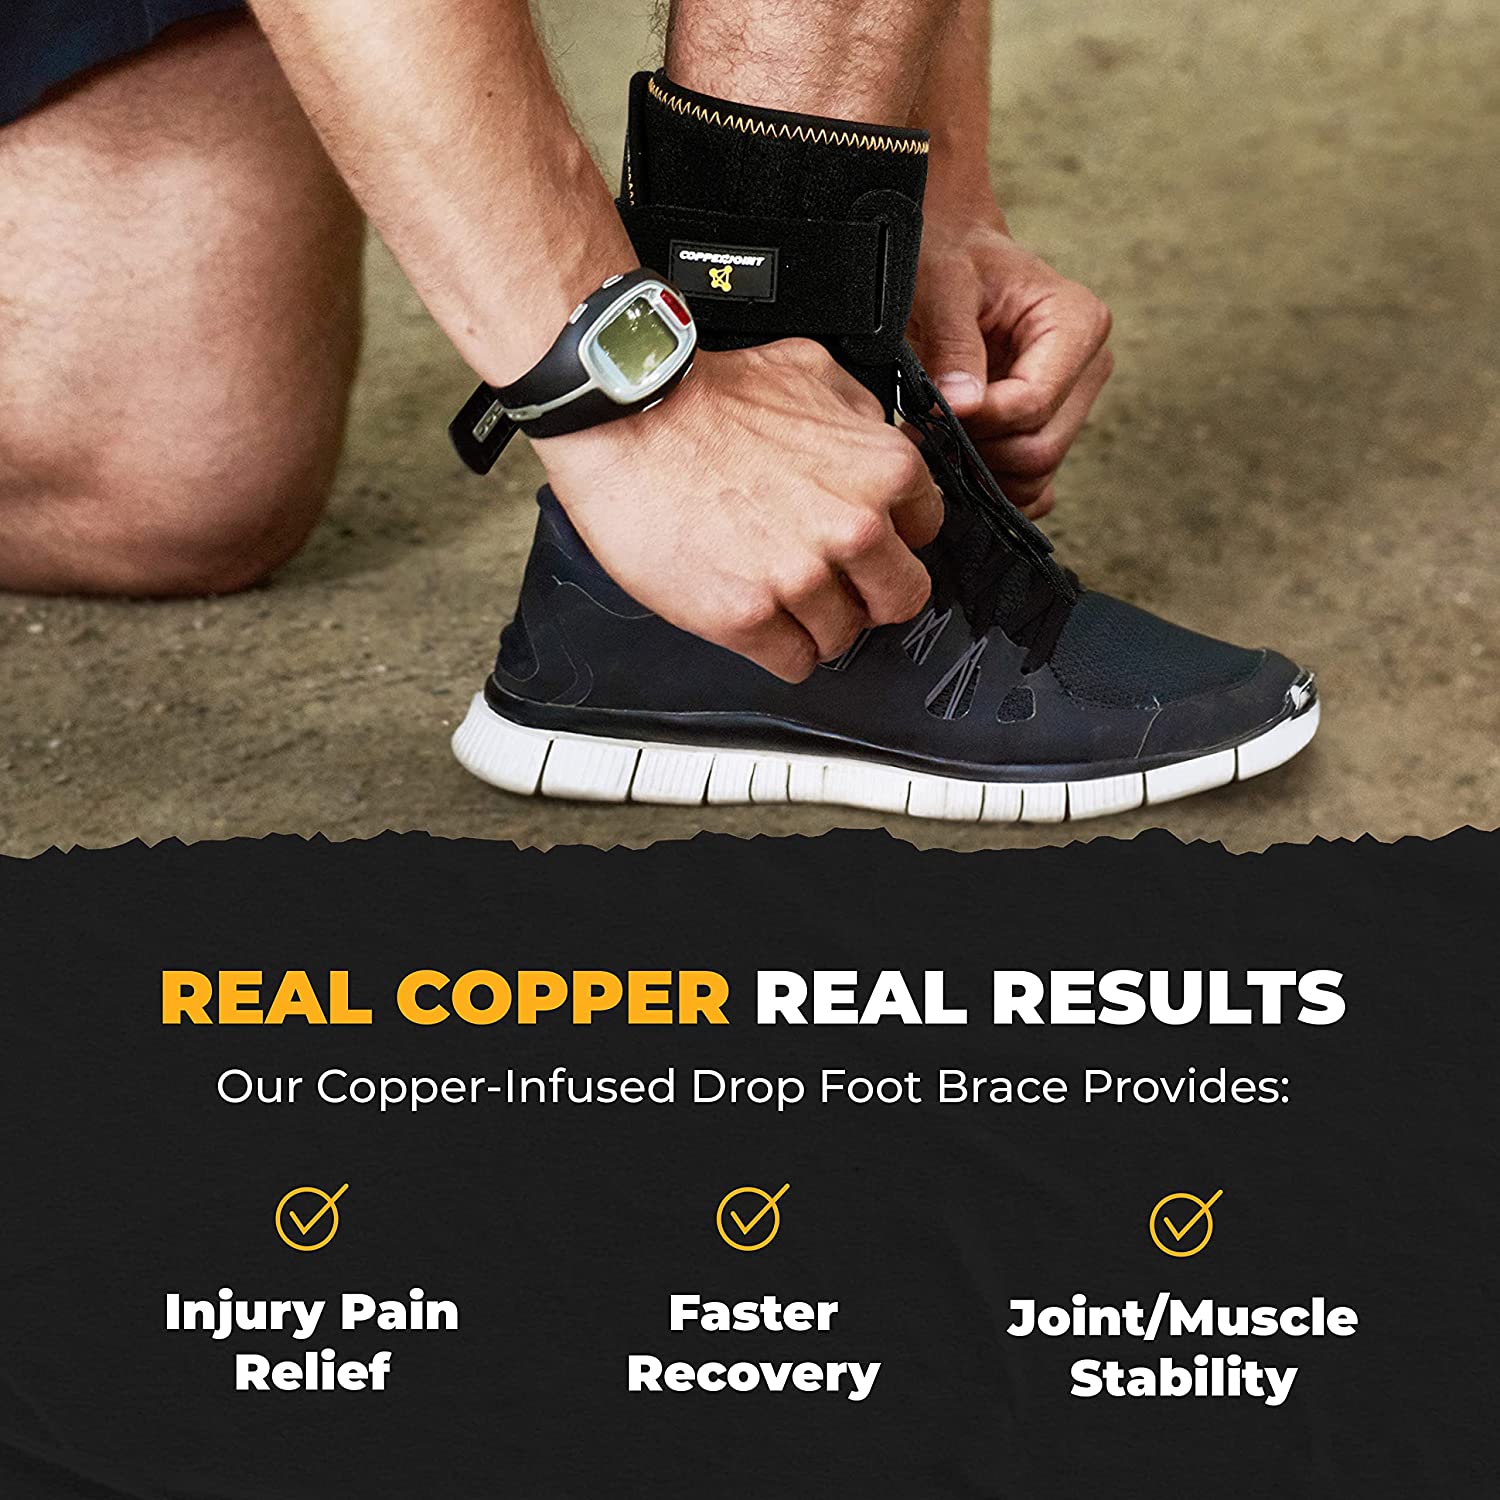 CopperJoint Launches New Afo Foot Drop Brace On Amazon